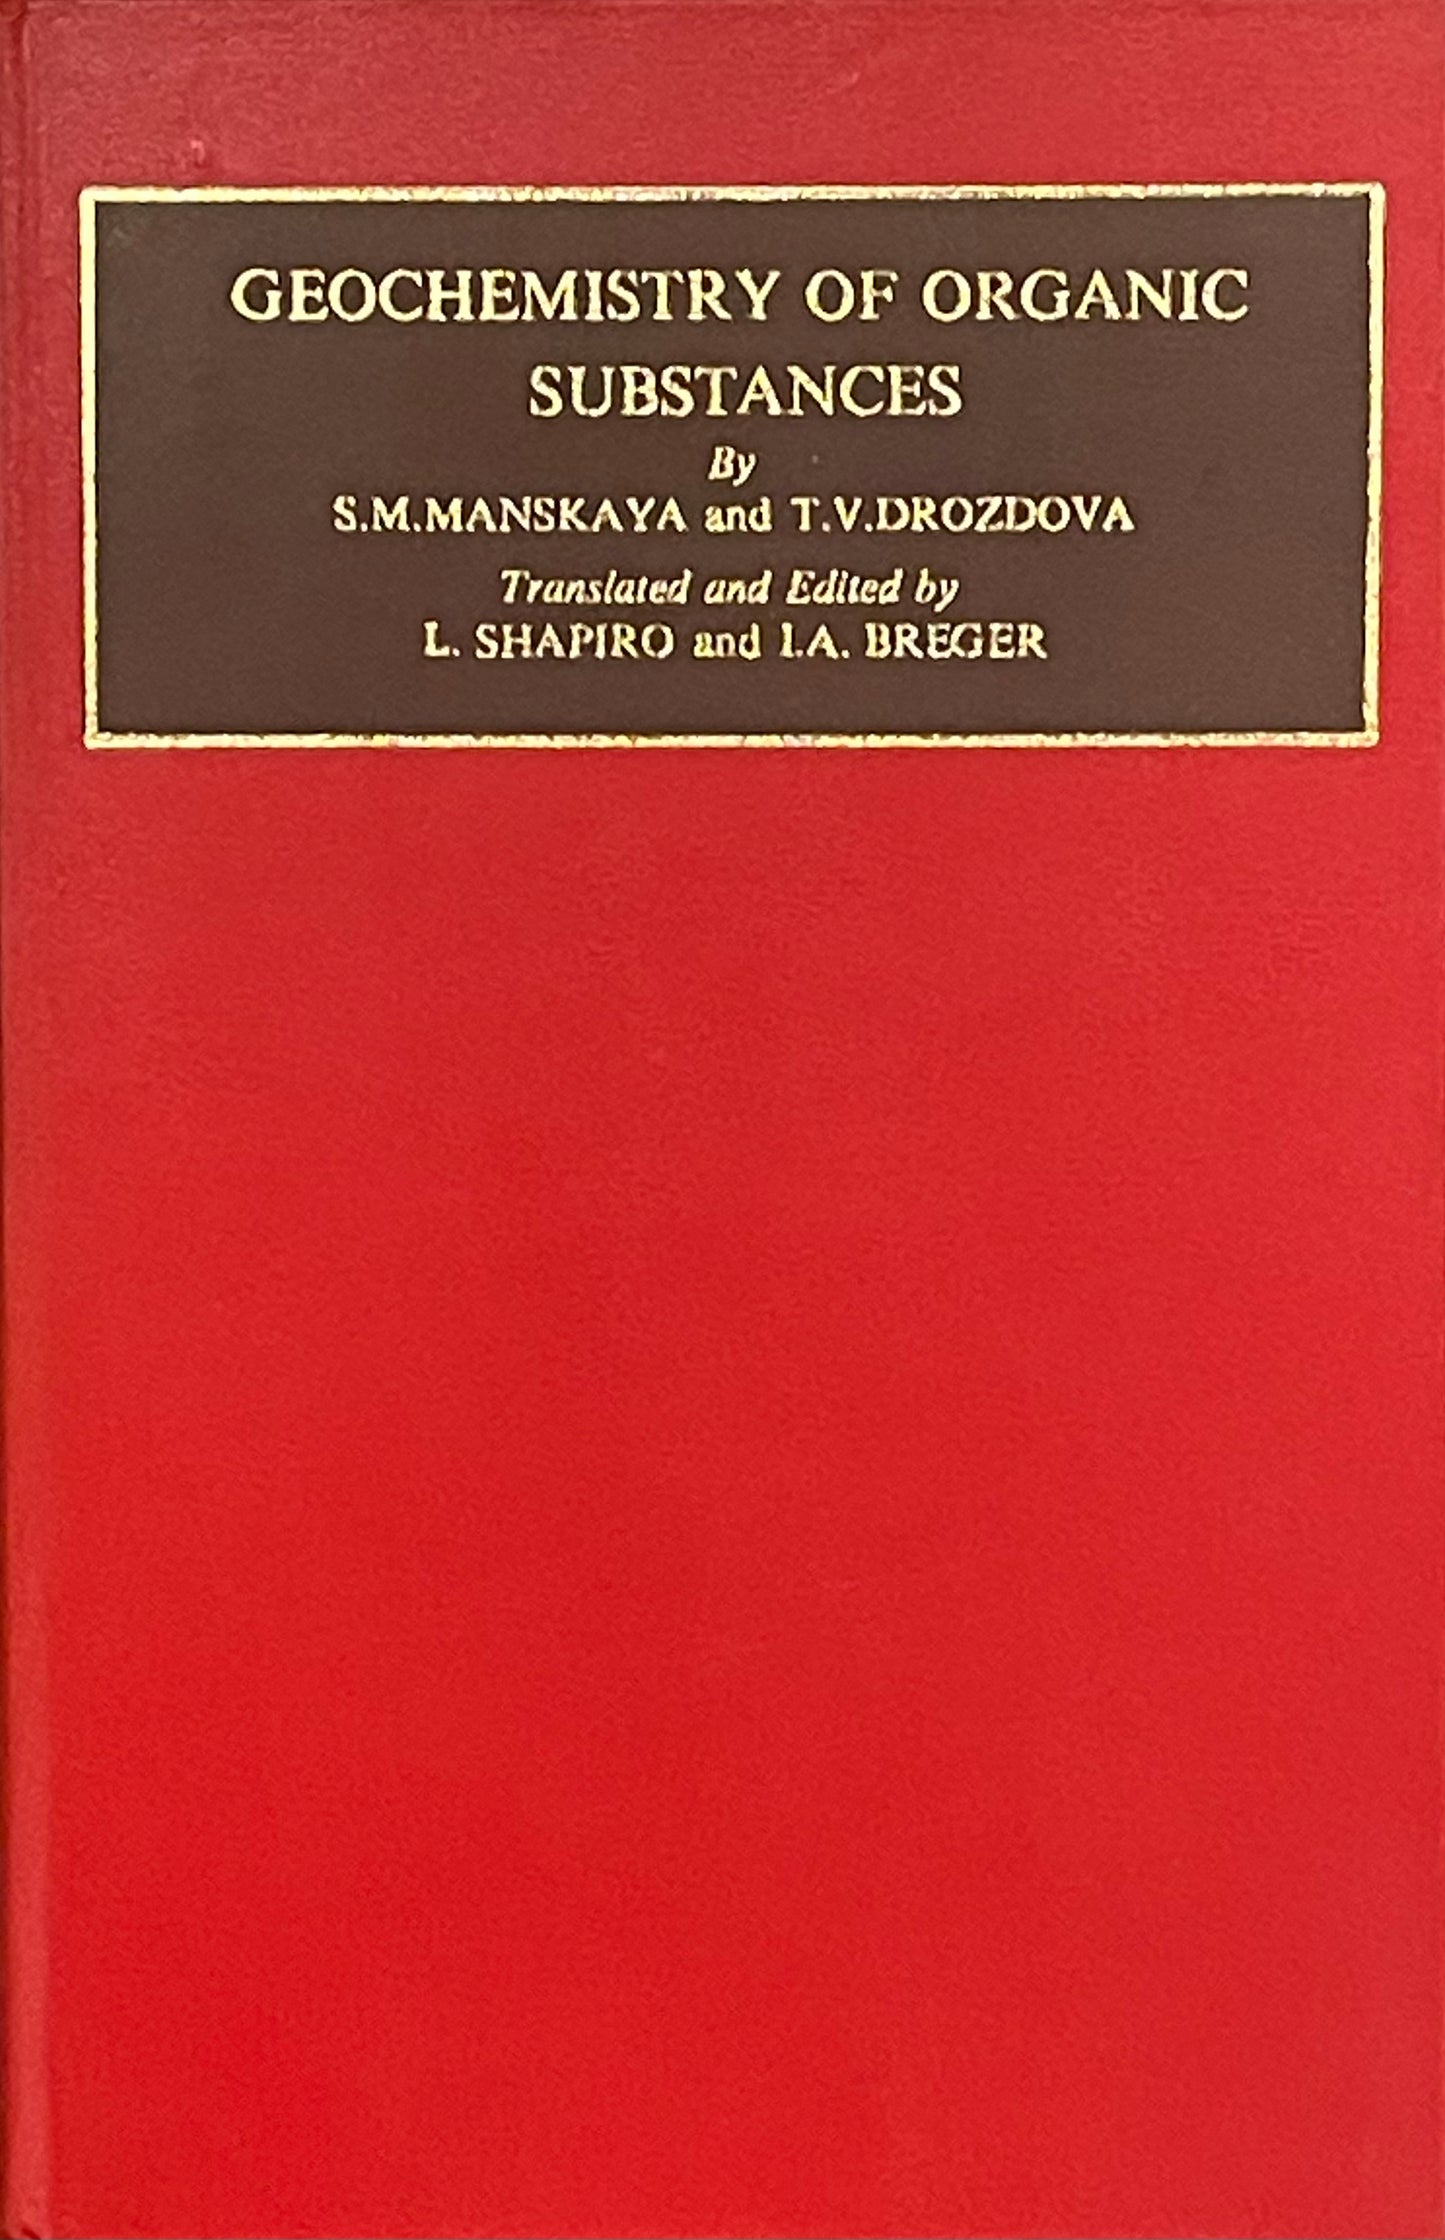 Geochemistry of Organic Substances by S.M. Manskaya and T.V. Drozdova First Edition Published in 1968 by Pergamon Press Printed in Hungary